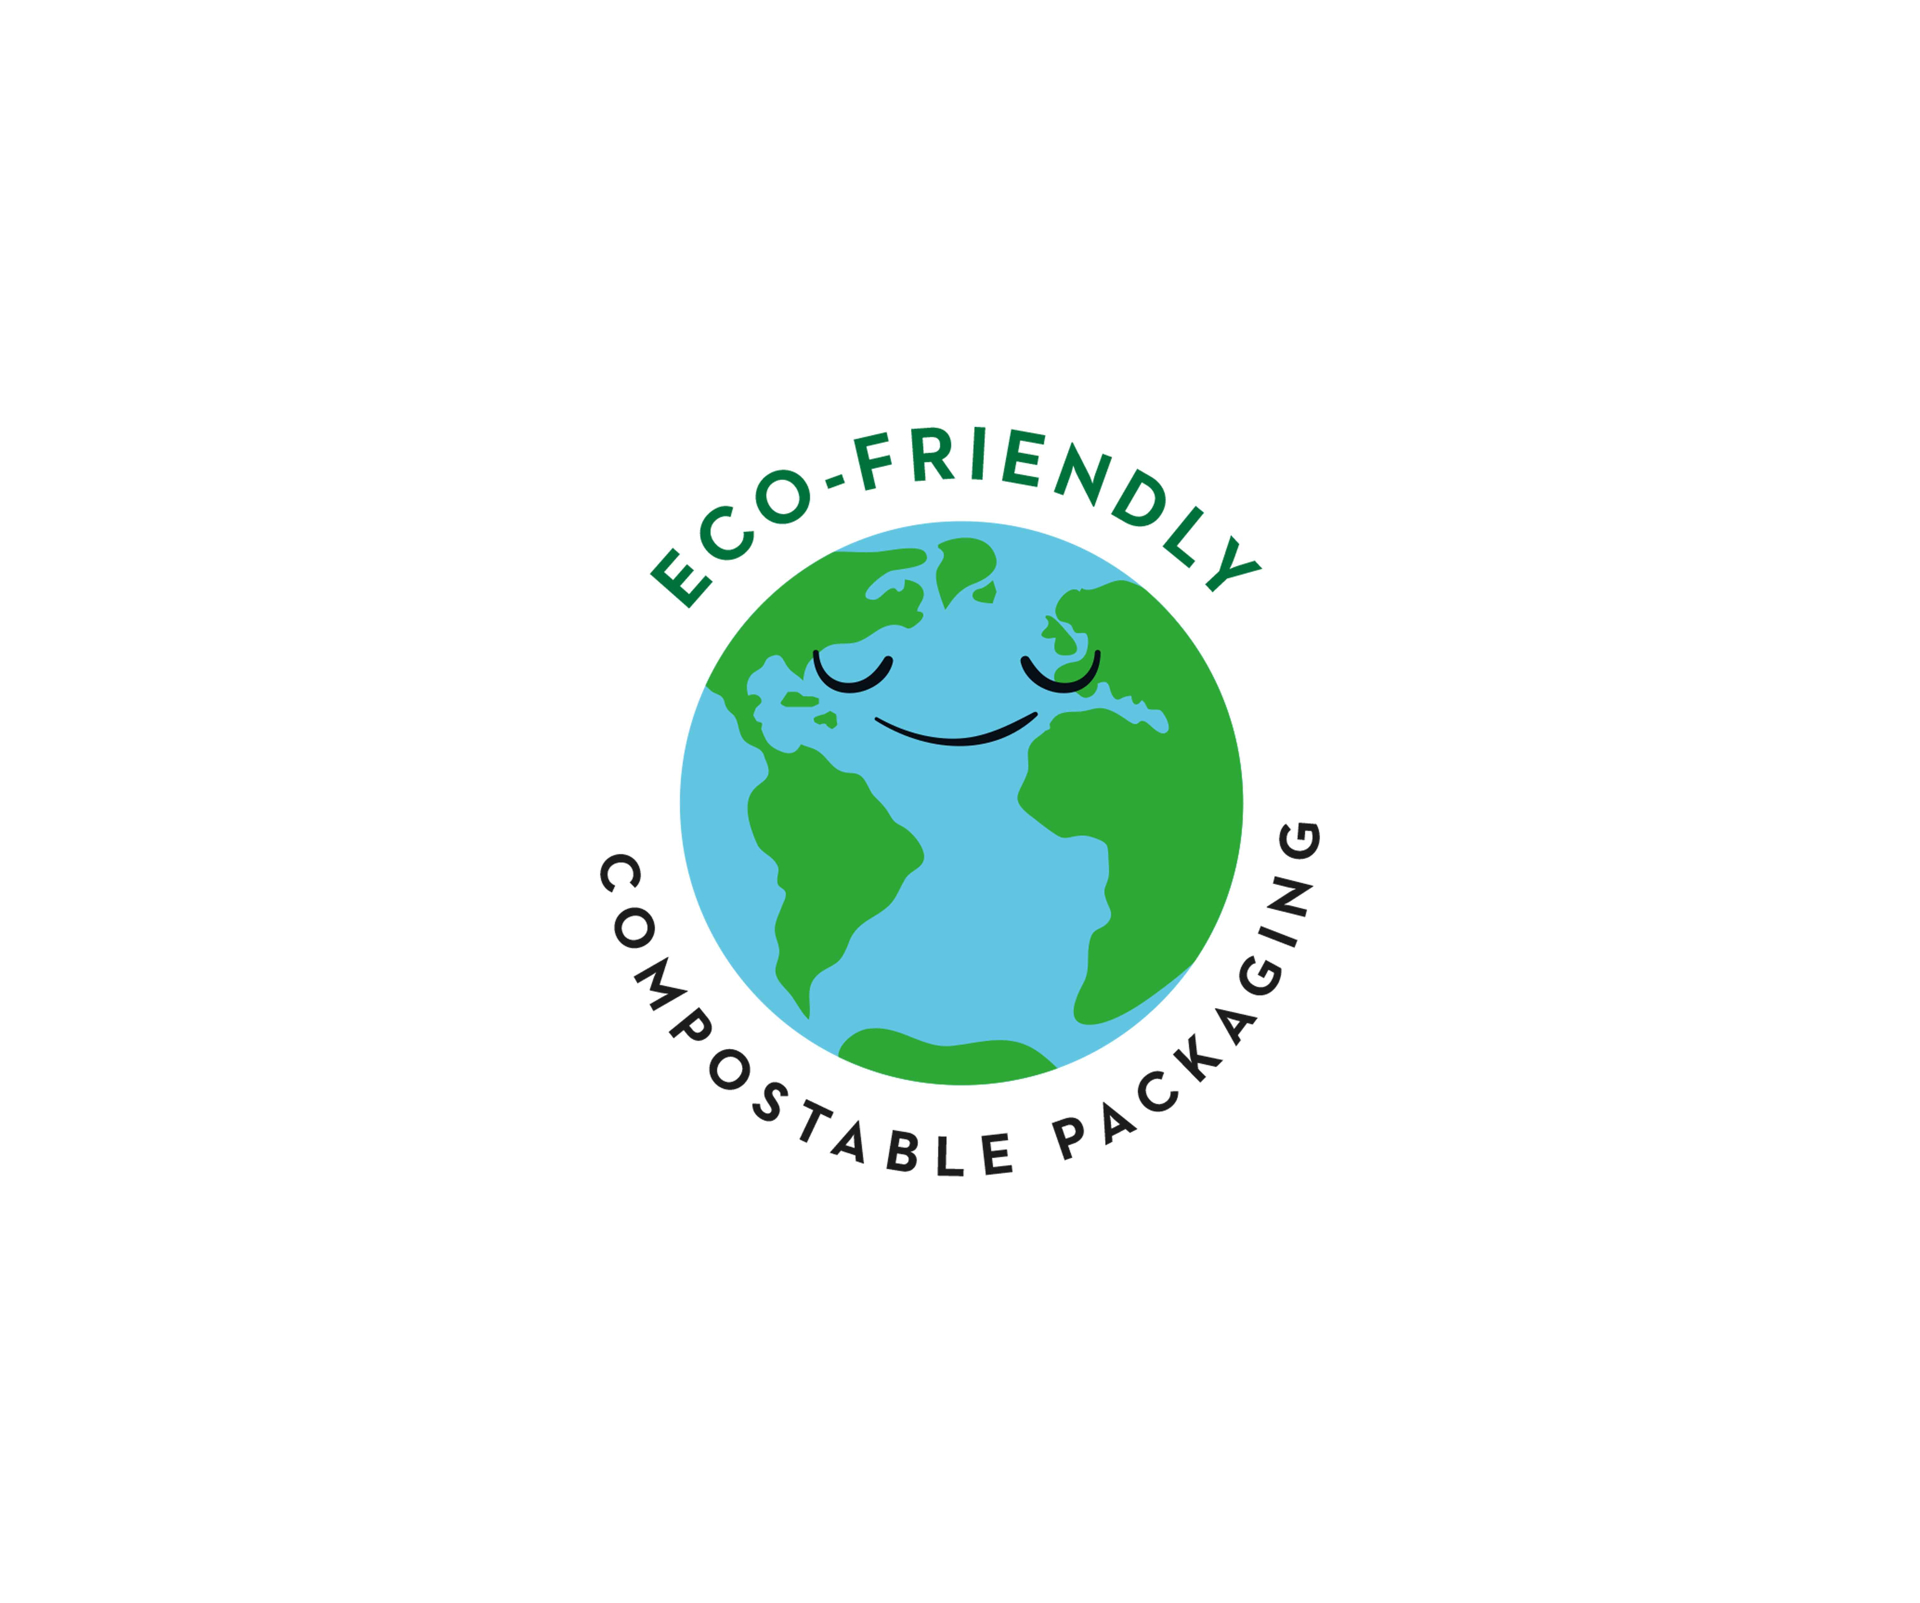 Eco-friendly, compostable packaging logo